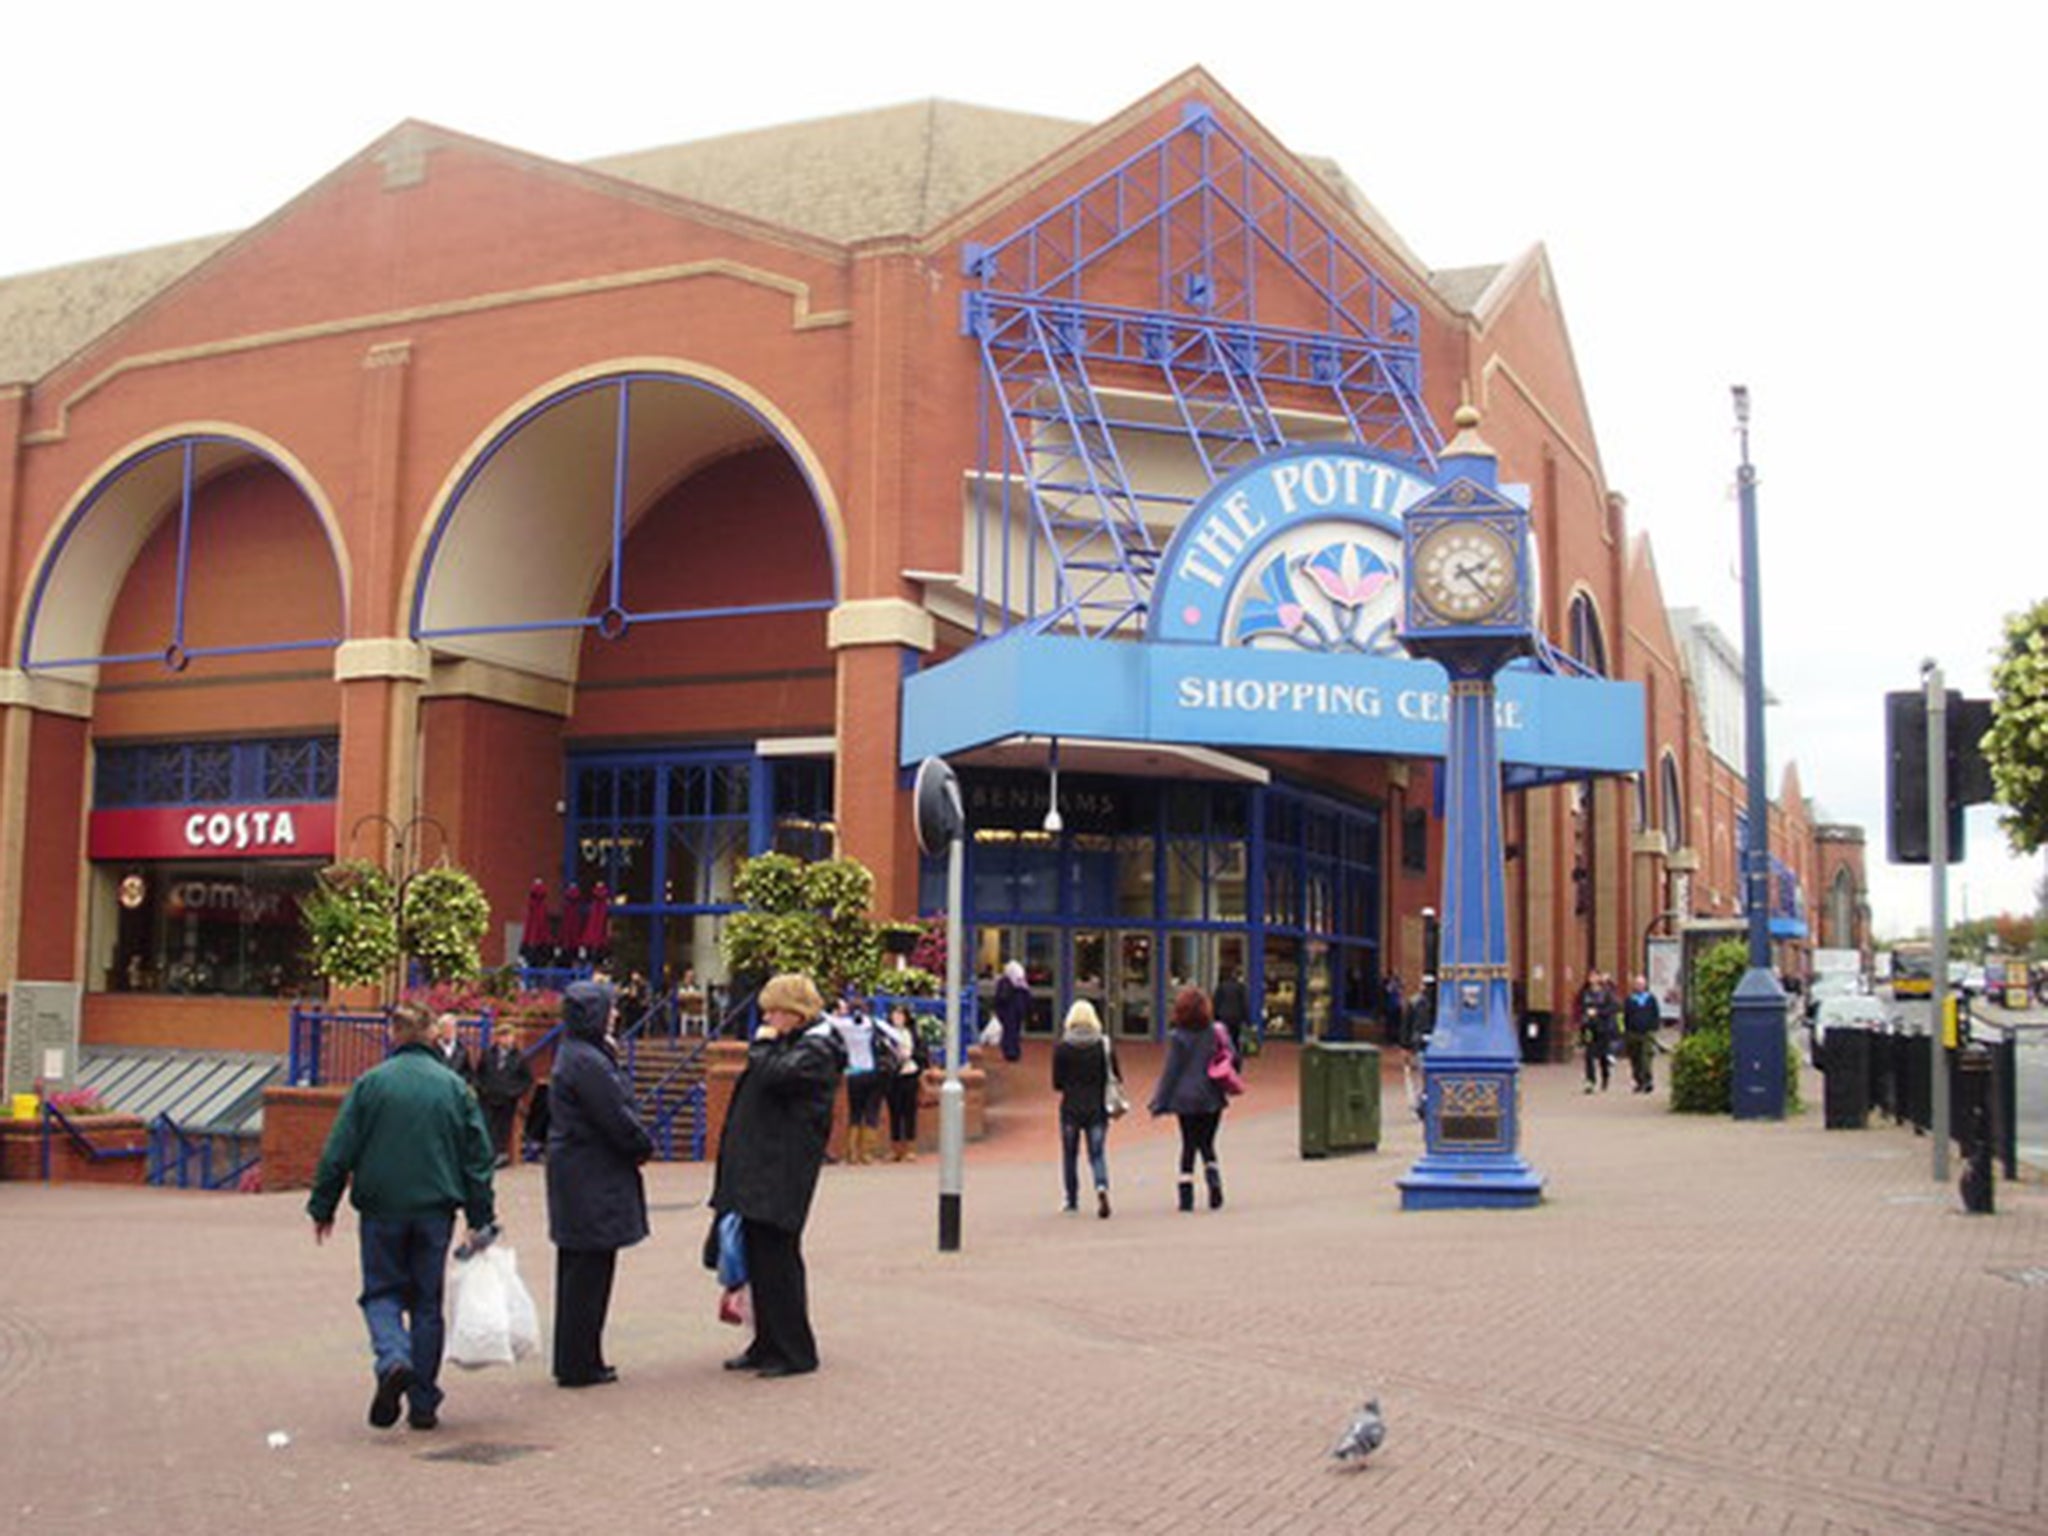 Parts of the busy shopping centre were cordoned off following the attack